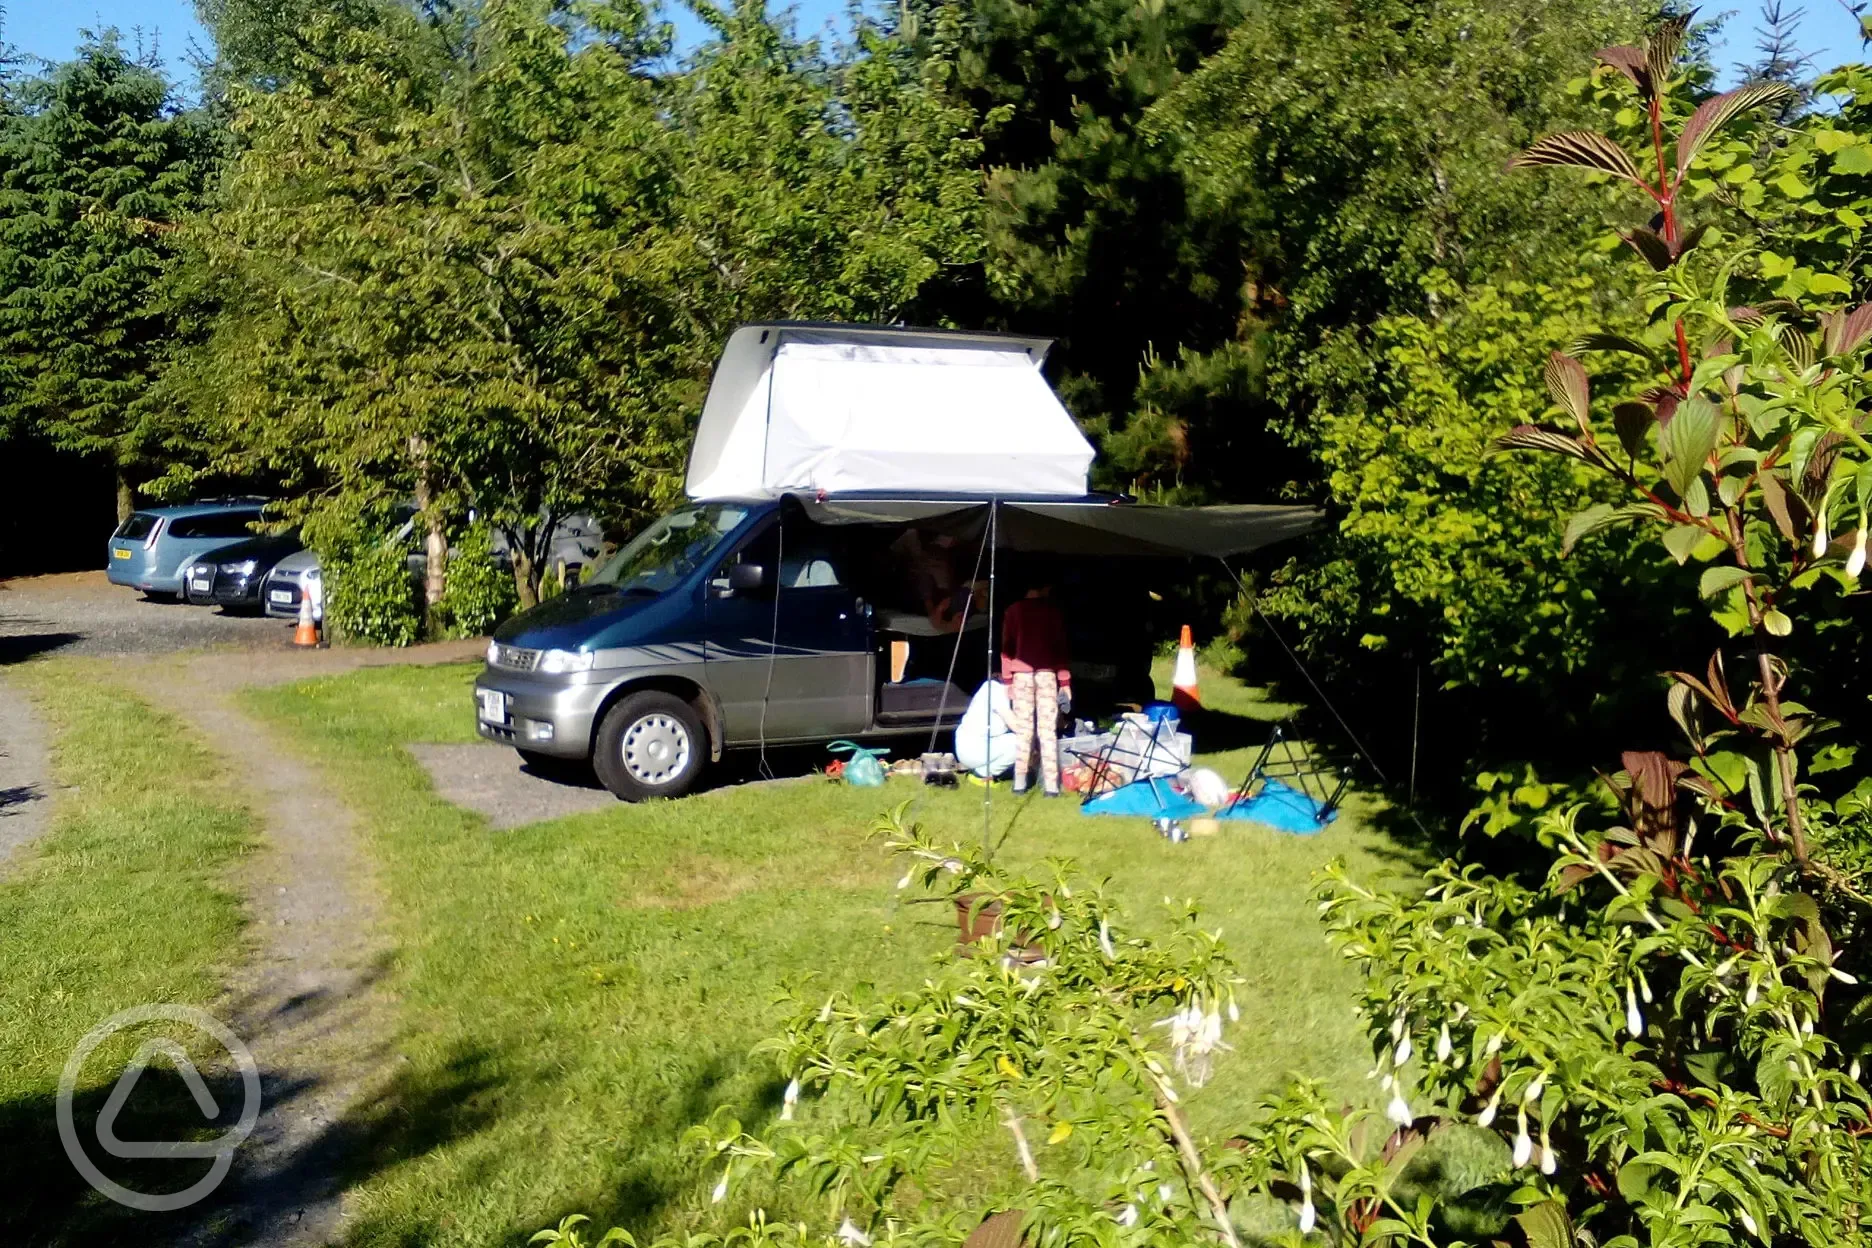 One of 3 campervan pitches